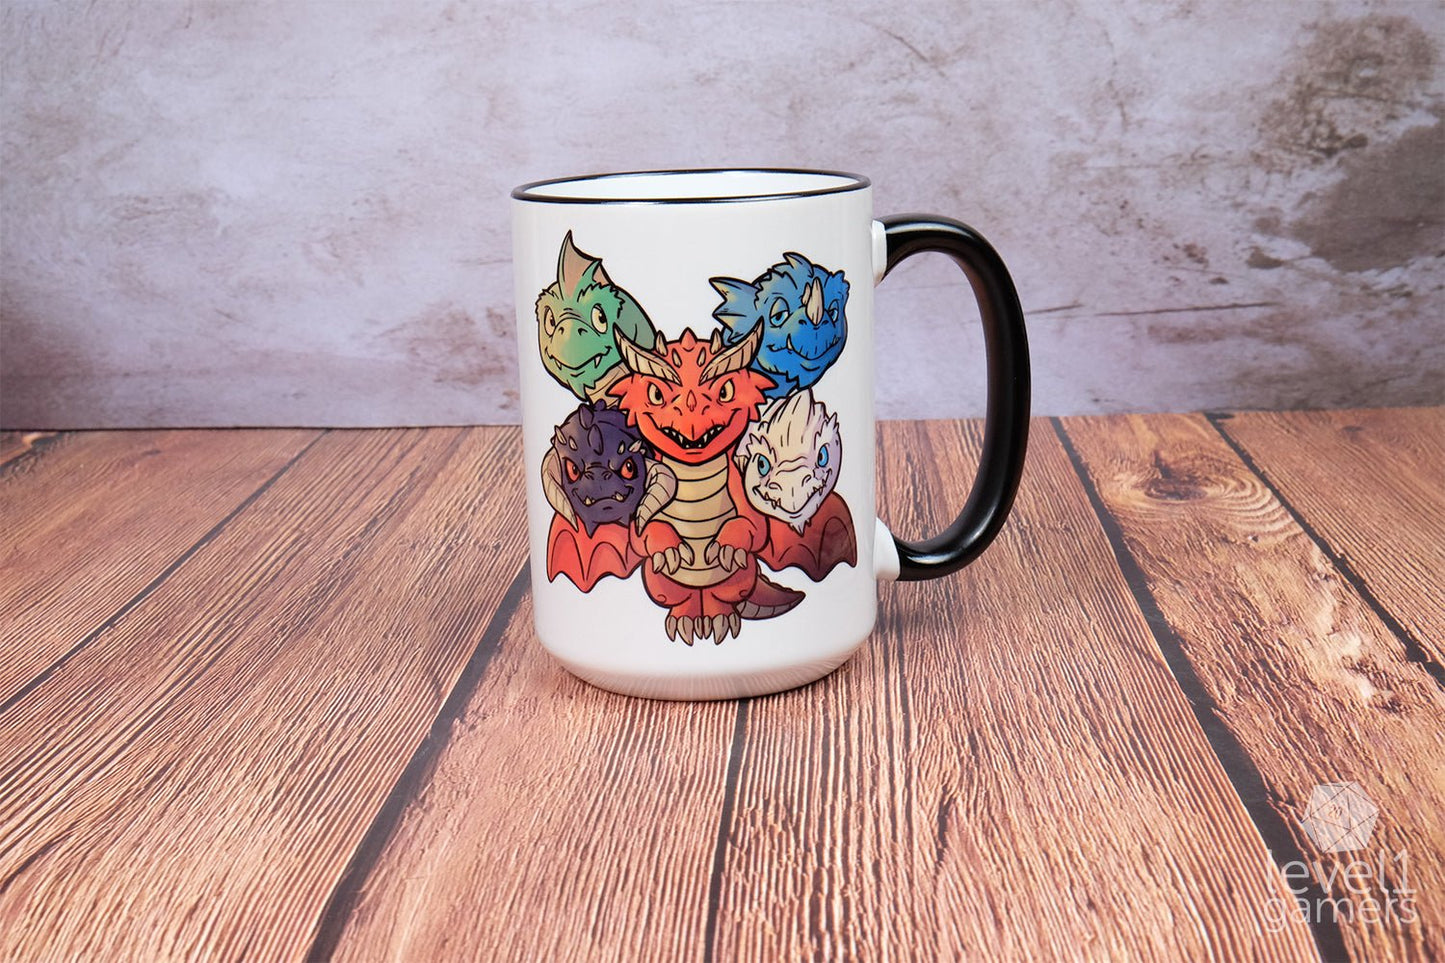 Little Queen of Dragons Mug - AKA Lil T  Level 1 Gamers   